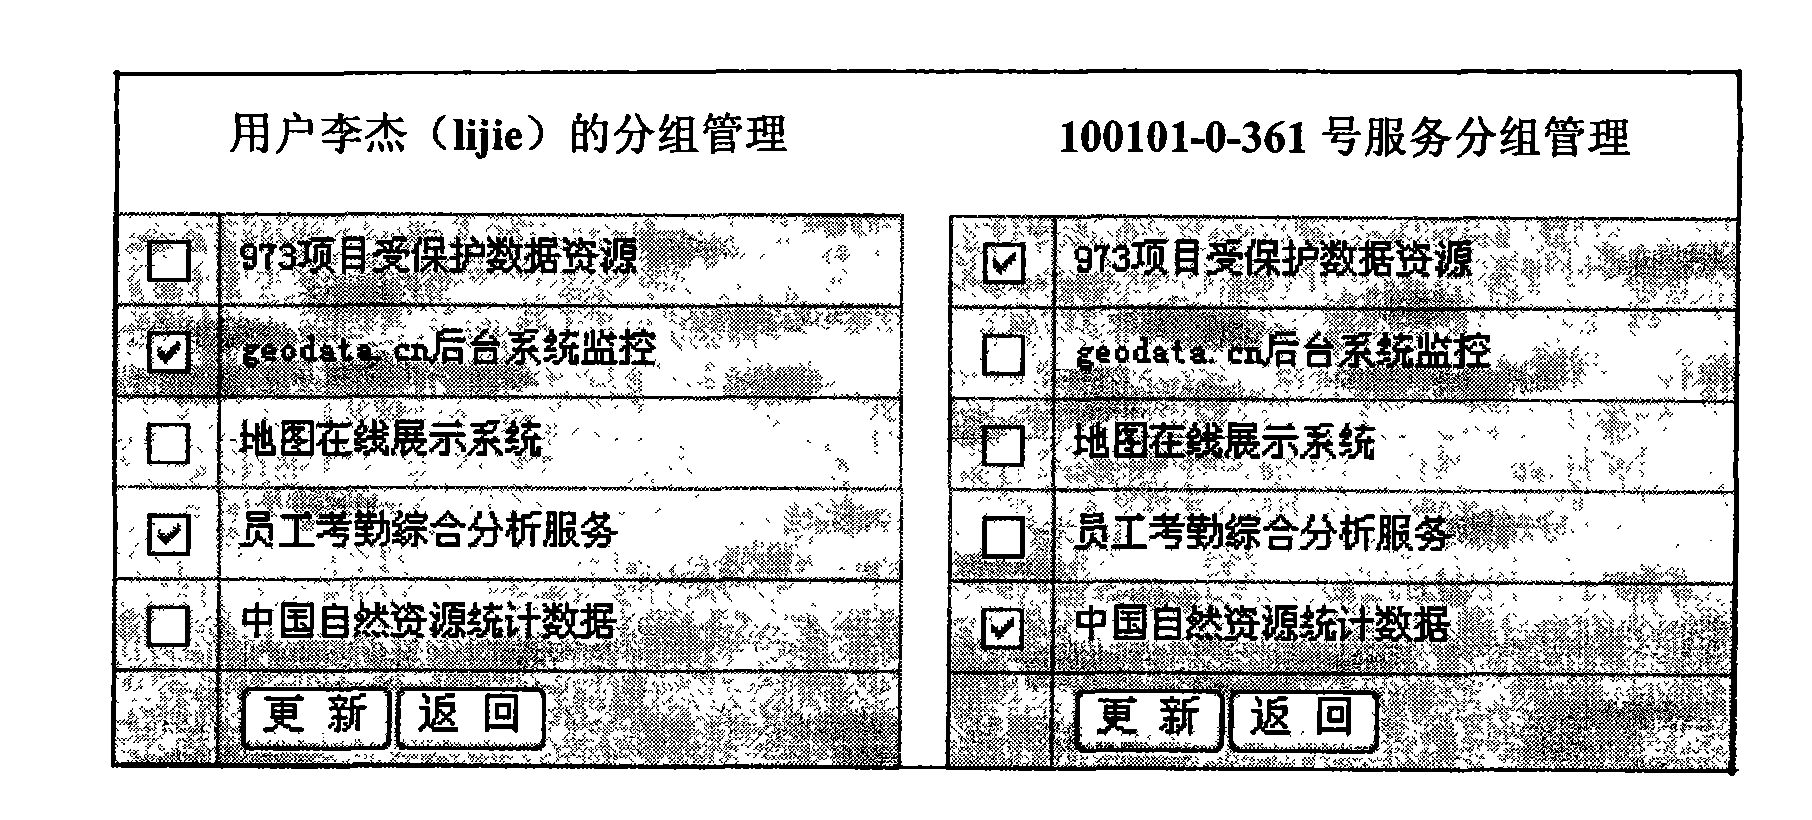 Distributed dual-license and access control method and system